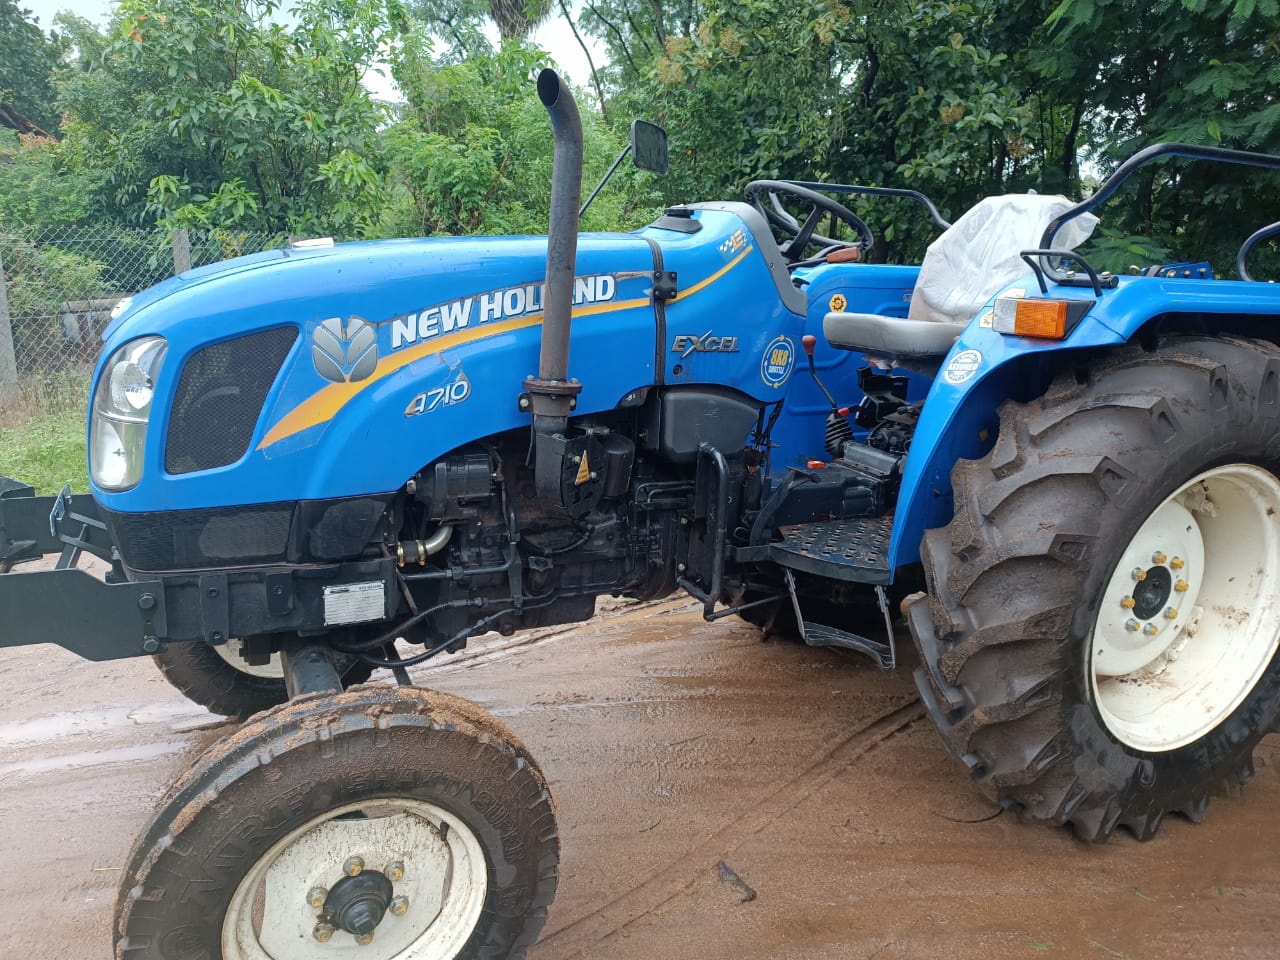 New holland 4710 new model excel serious evaco engine